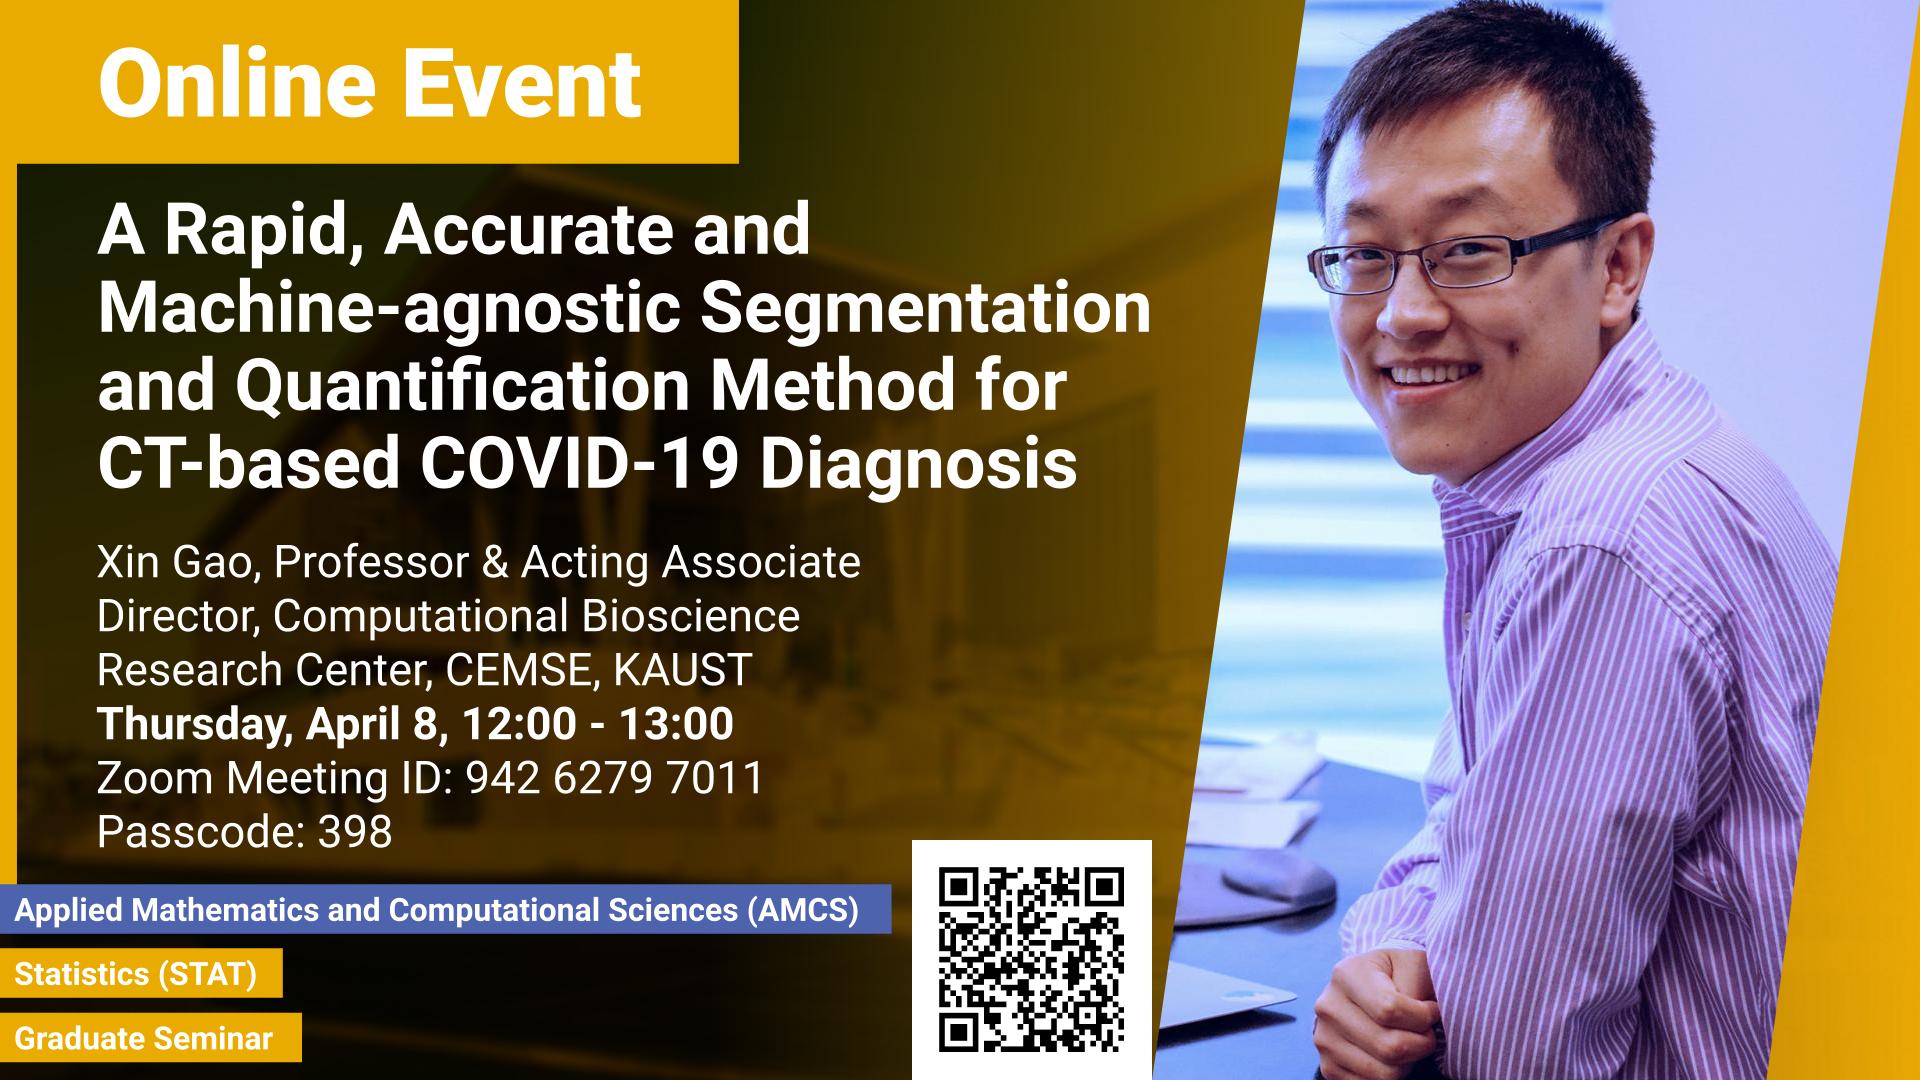 KAUST CEMSE AMCS STAT Graduate Seminar A Rapid, Accurate and Machine-agnostic Segmentation and Quantification  Method for CT-based COVID-19 Diagnosis